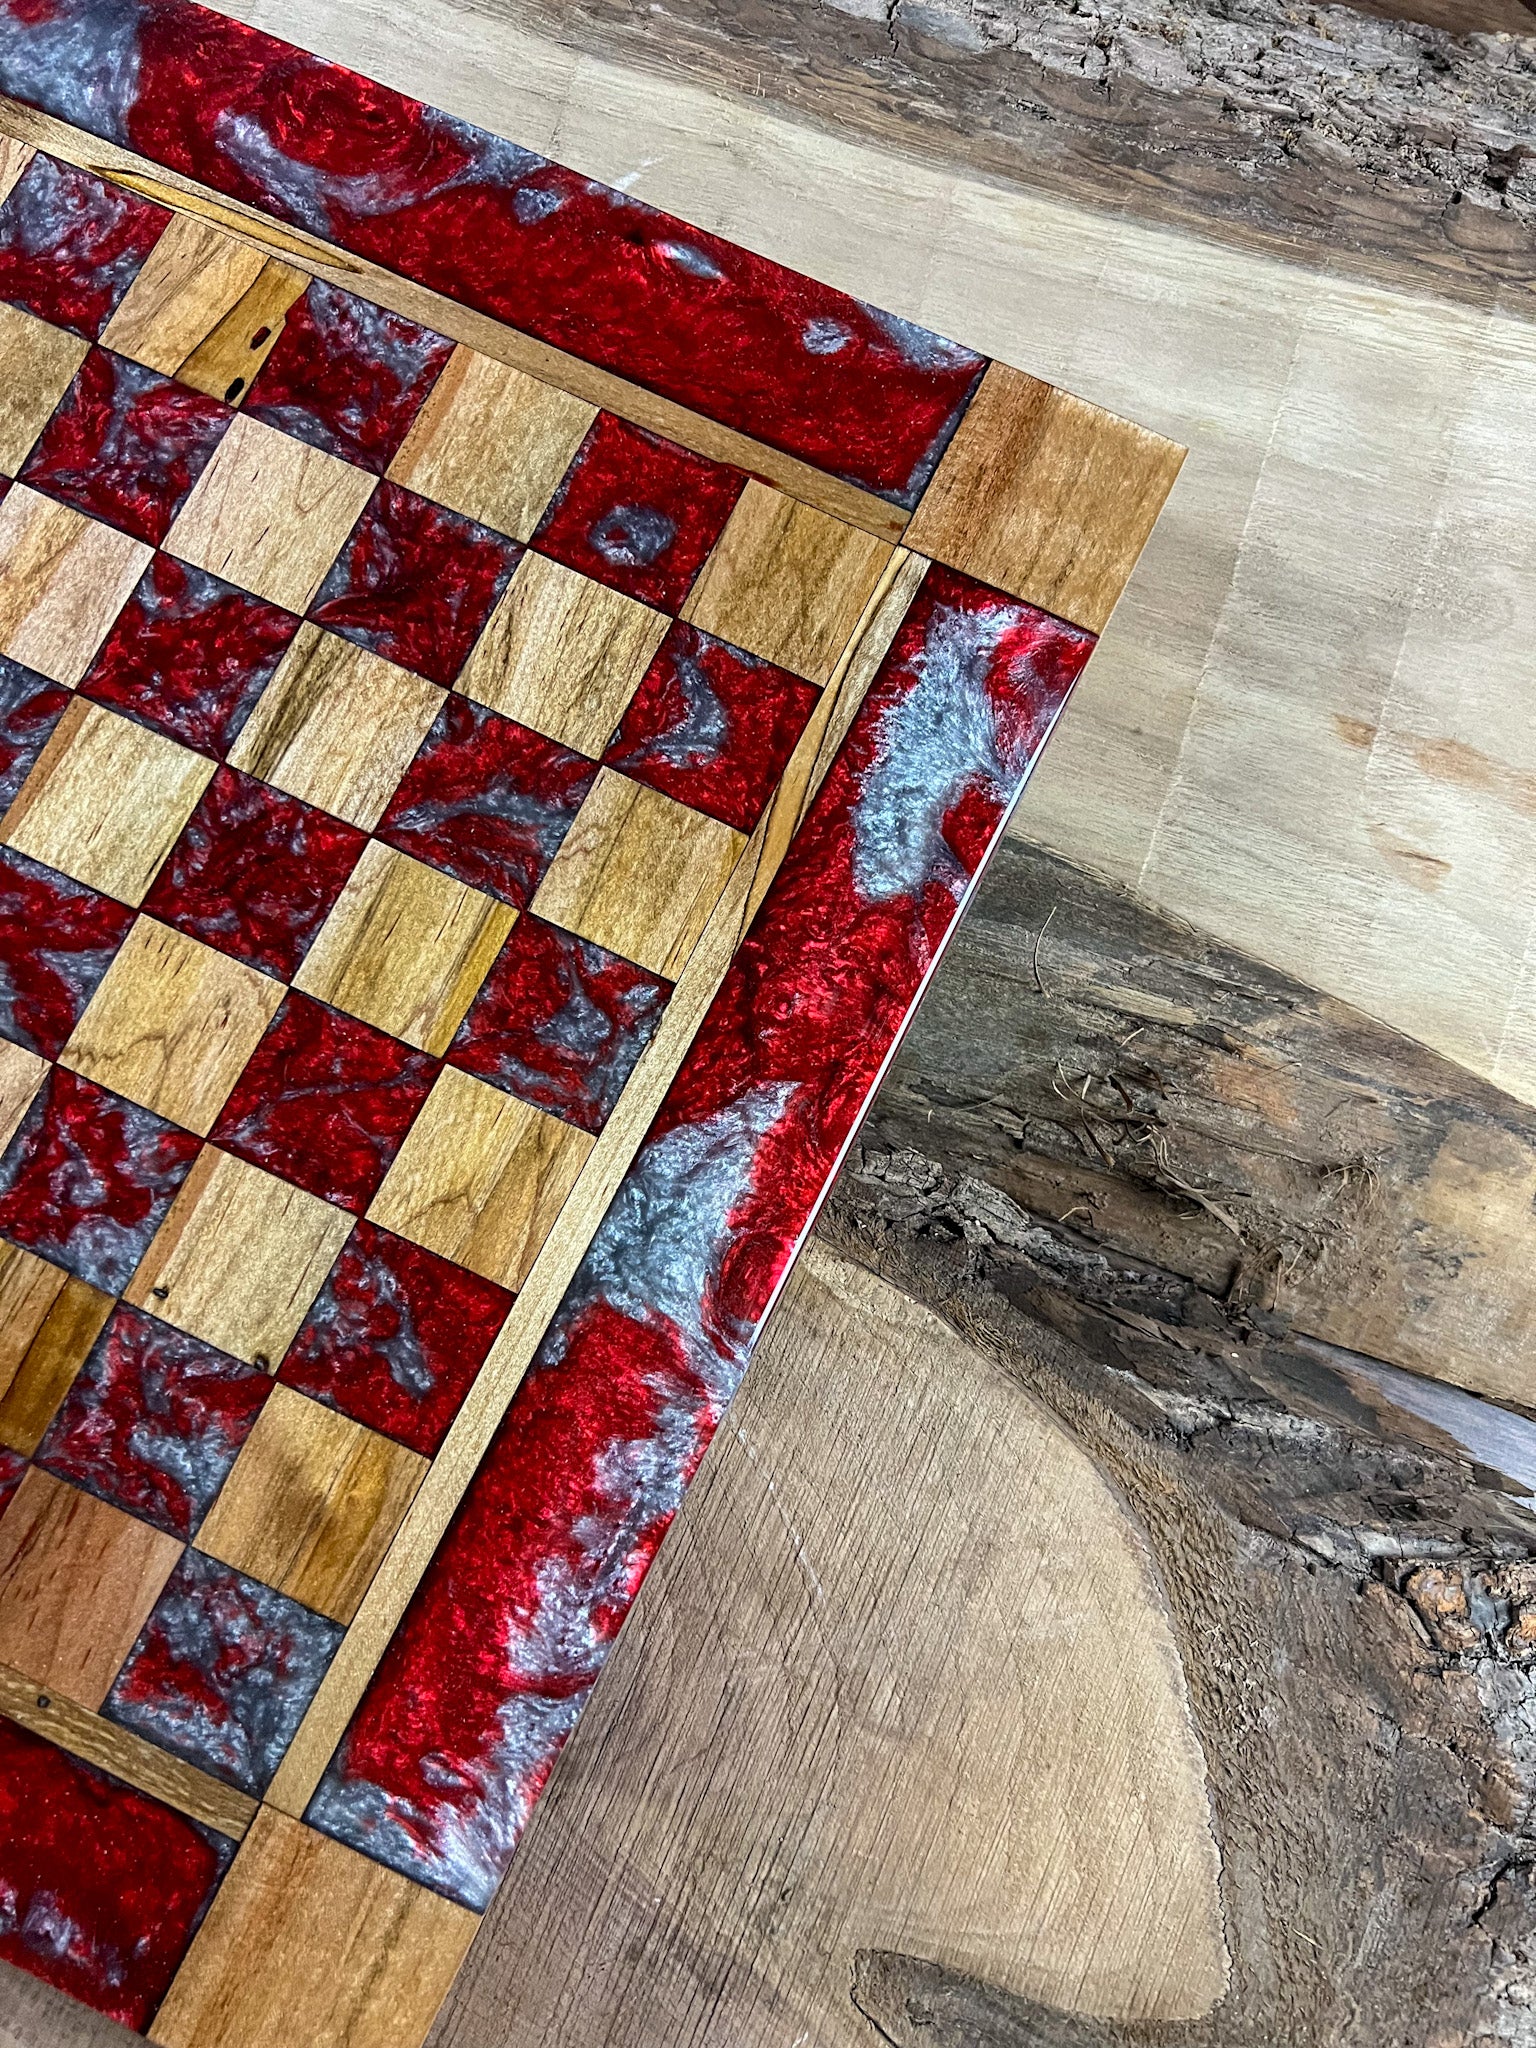 Red Silver Cloud Maple Wood Chess Board (With Border)